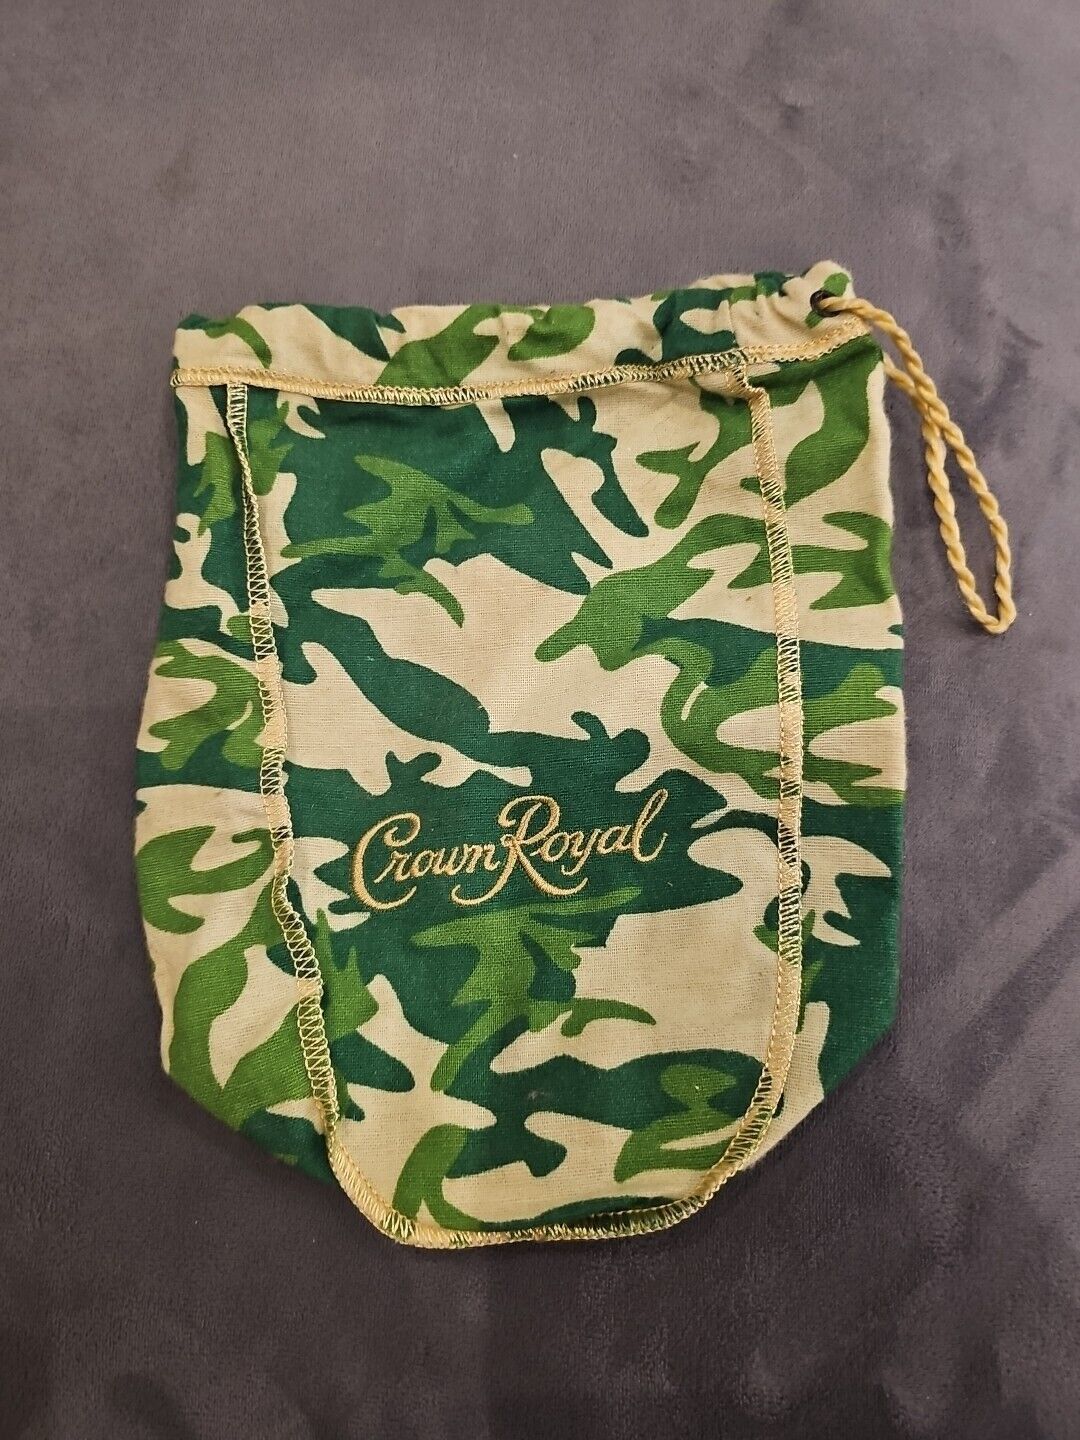 CROWN ROYAL Limited Edition Green Camouflage Bag 750ml Size Collectible